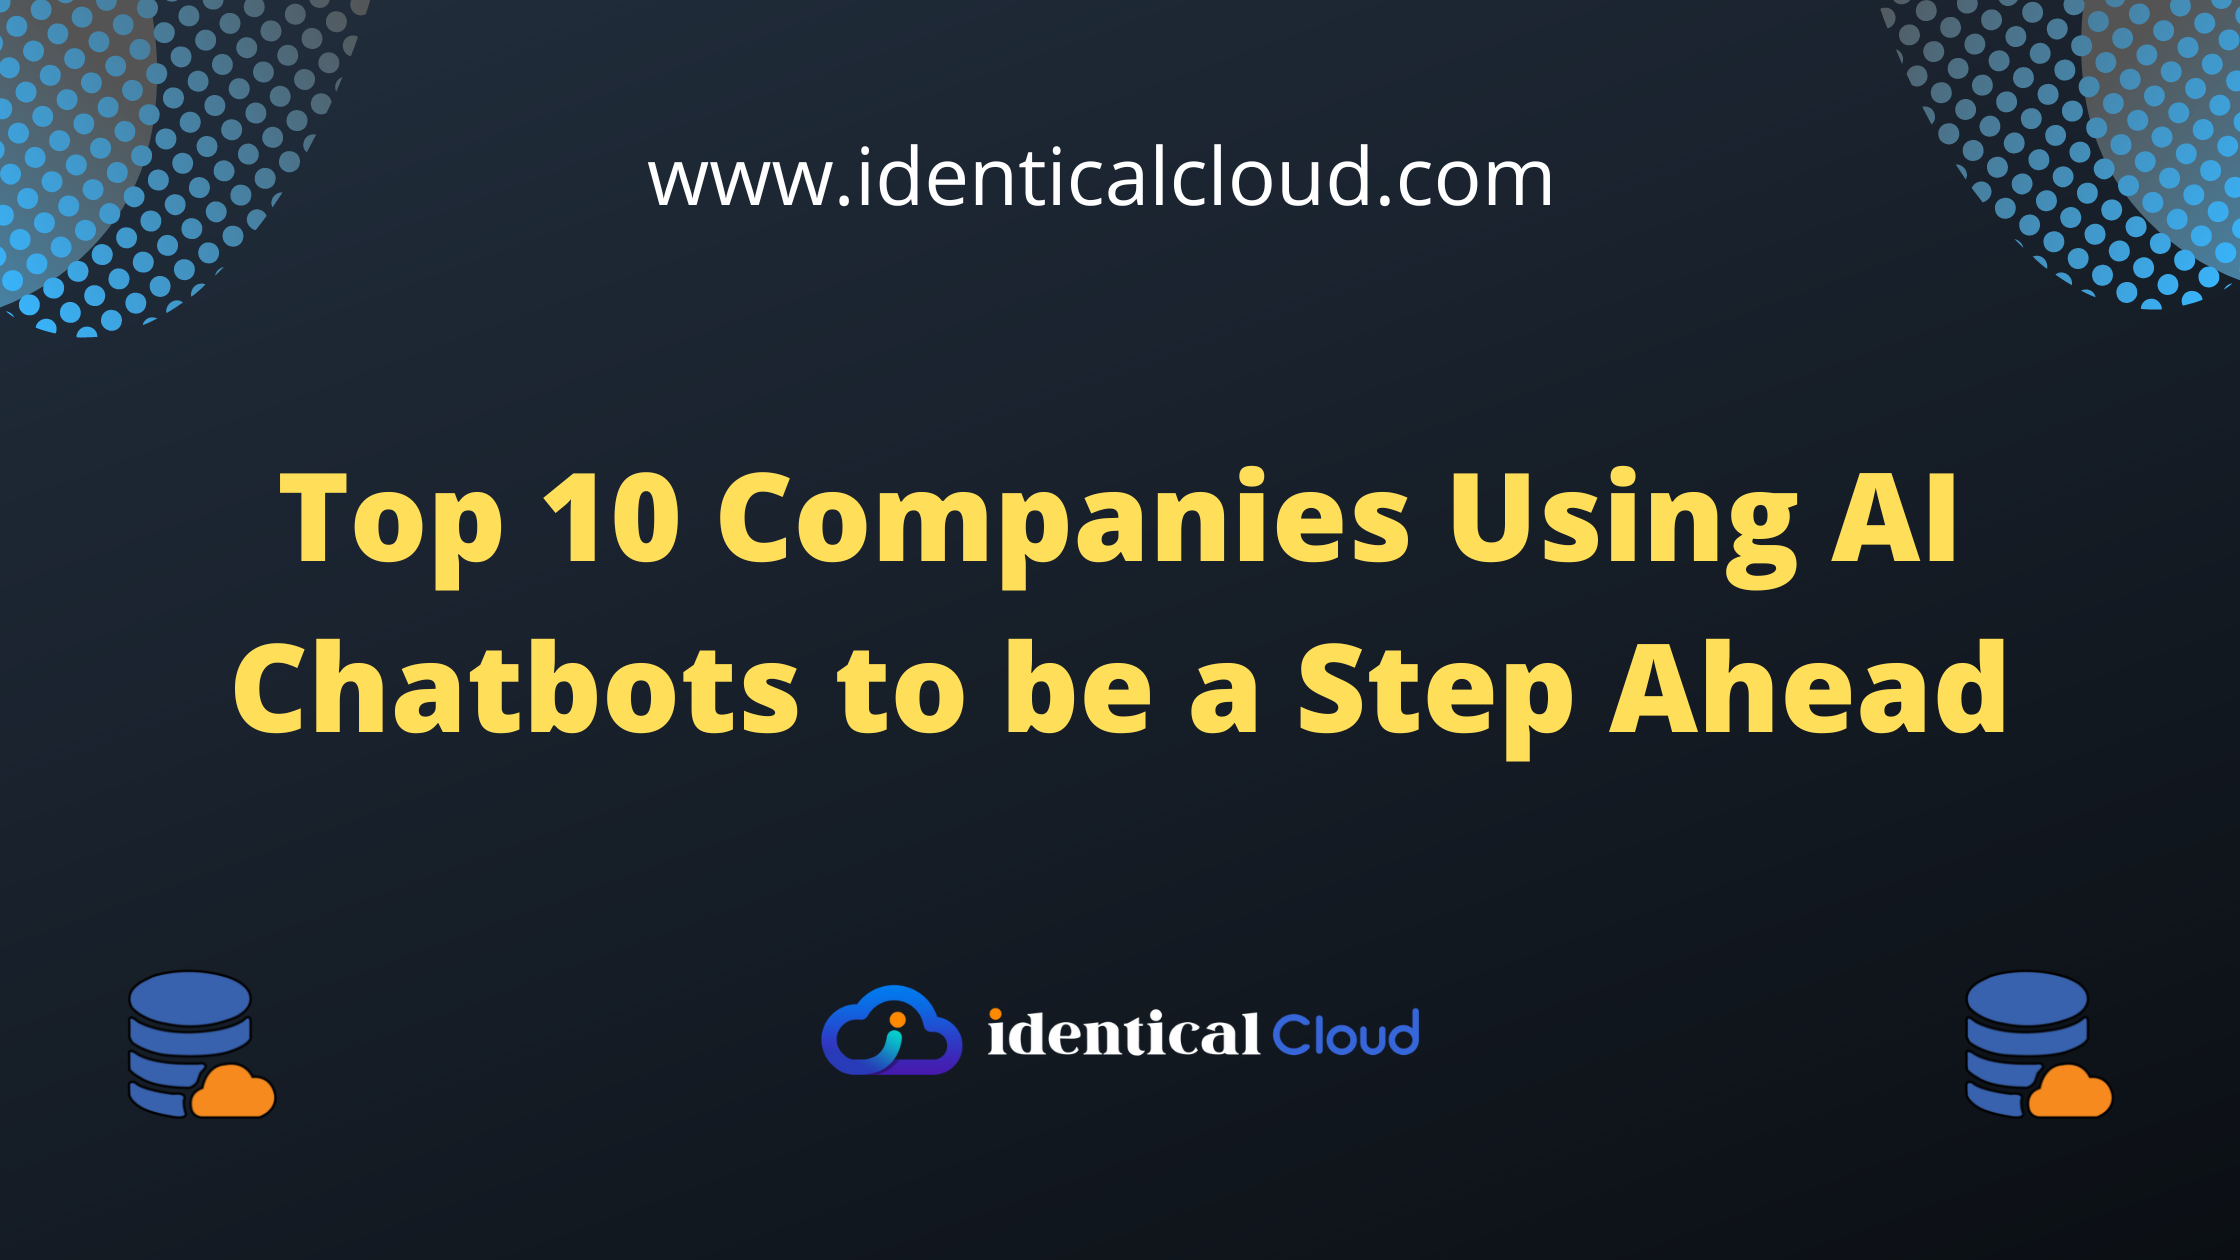 Top 10 Companies Using AI Chatbots to be a Step Ahead